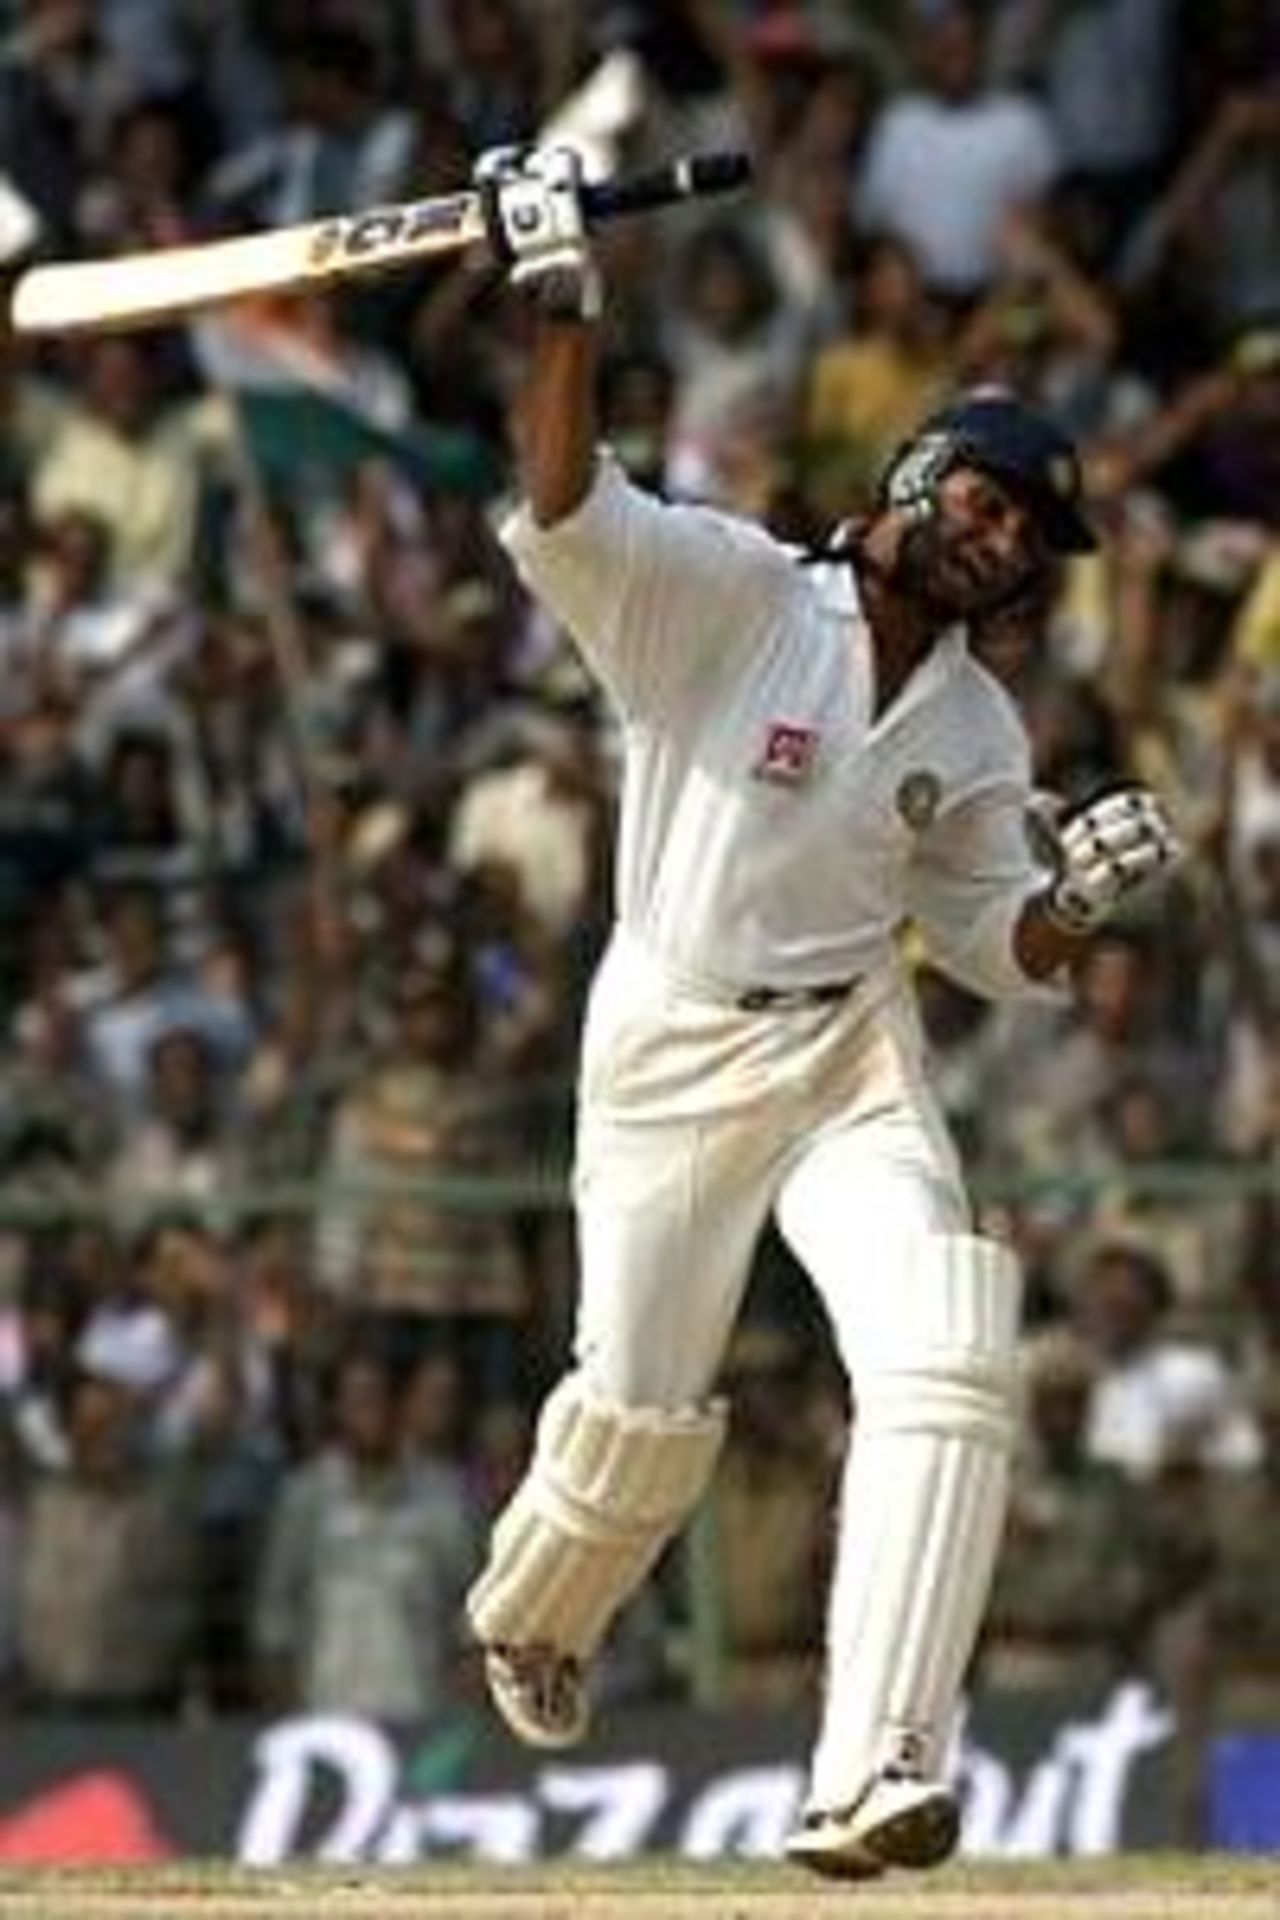 Harbhajan Singh of India celebrates as he completes the winning runs as Glenn McGrath of Australia can't hide his disappoinment, during day five of the third test between India and Australia at the M.A. Chidambaram Stadium, Chennai, India. India won the Test by two wickets and the series 2-1